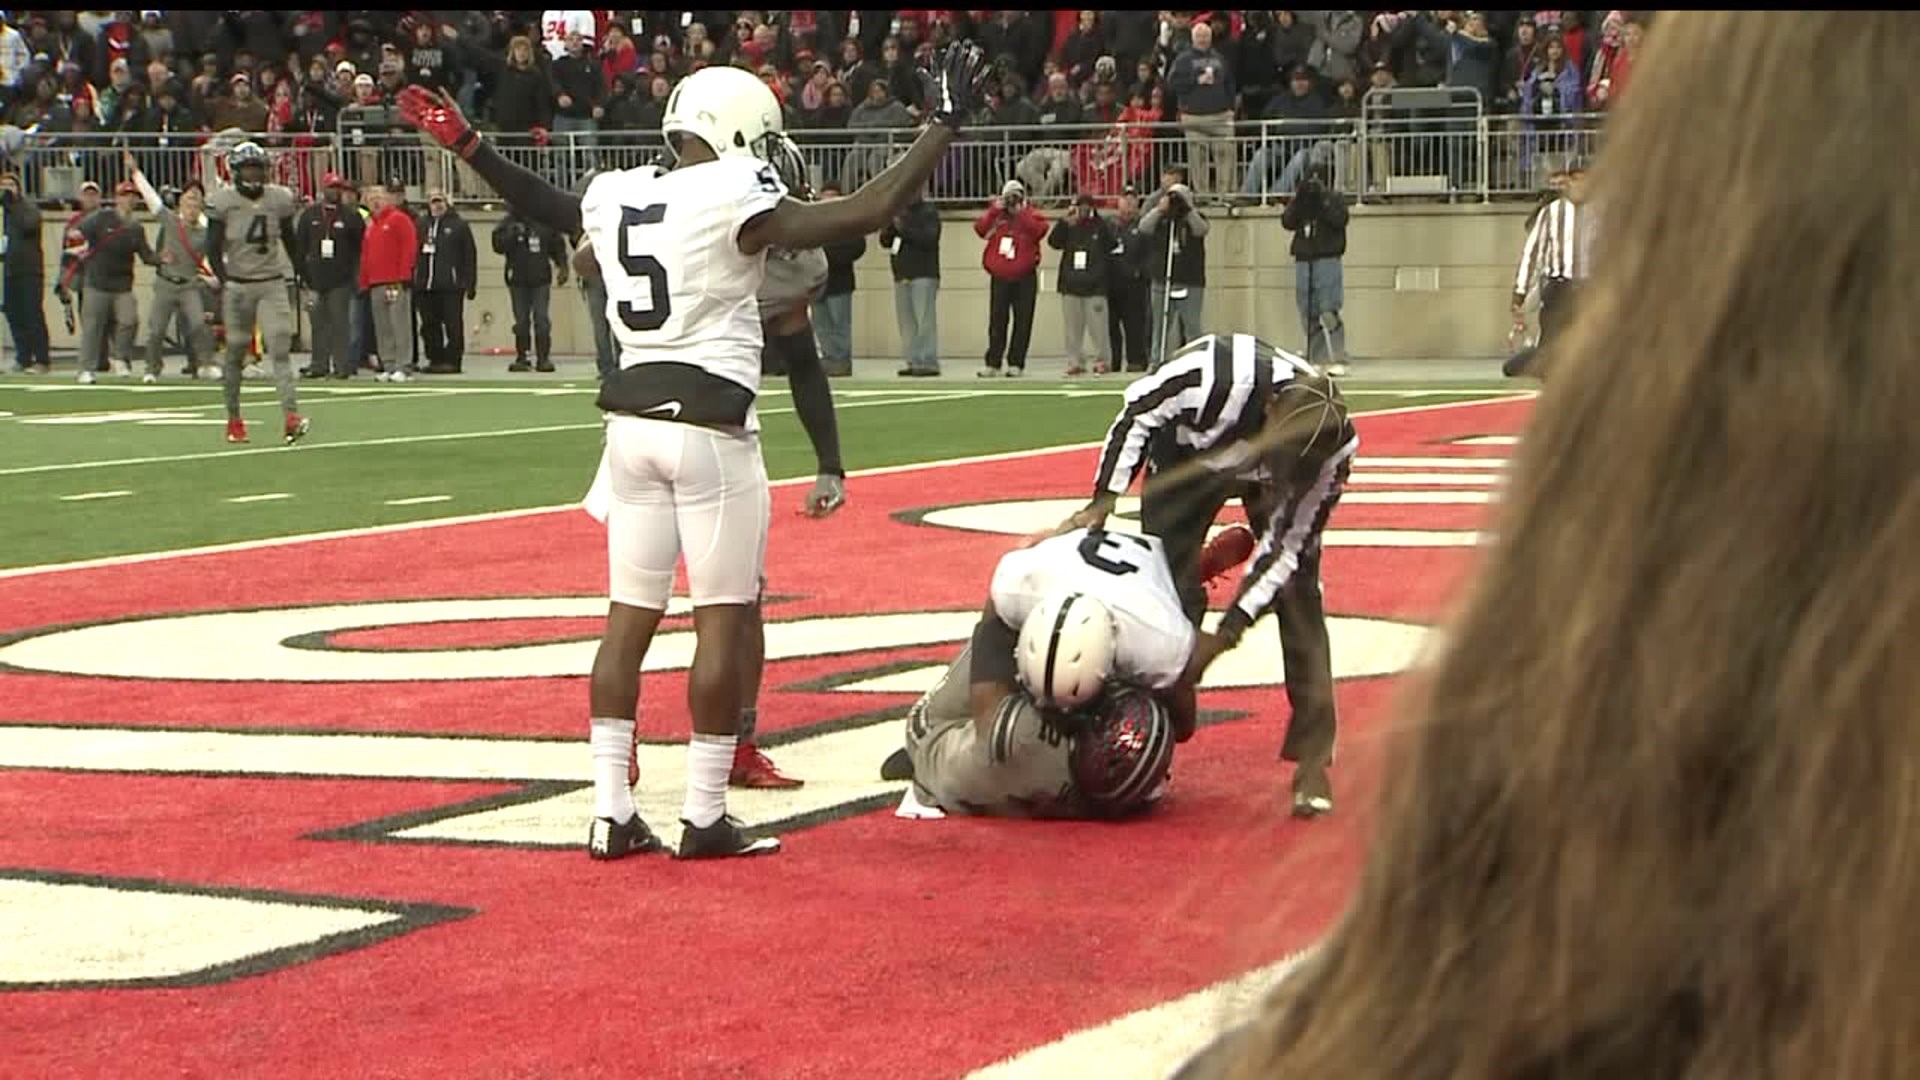 The Buckeyes are ready for another tight finish when they welcome Penn State to the Horseshoe